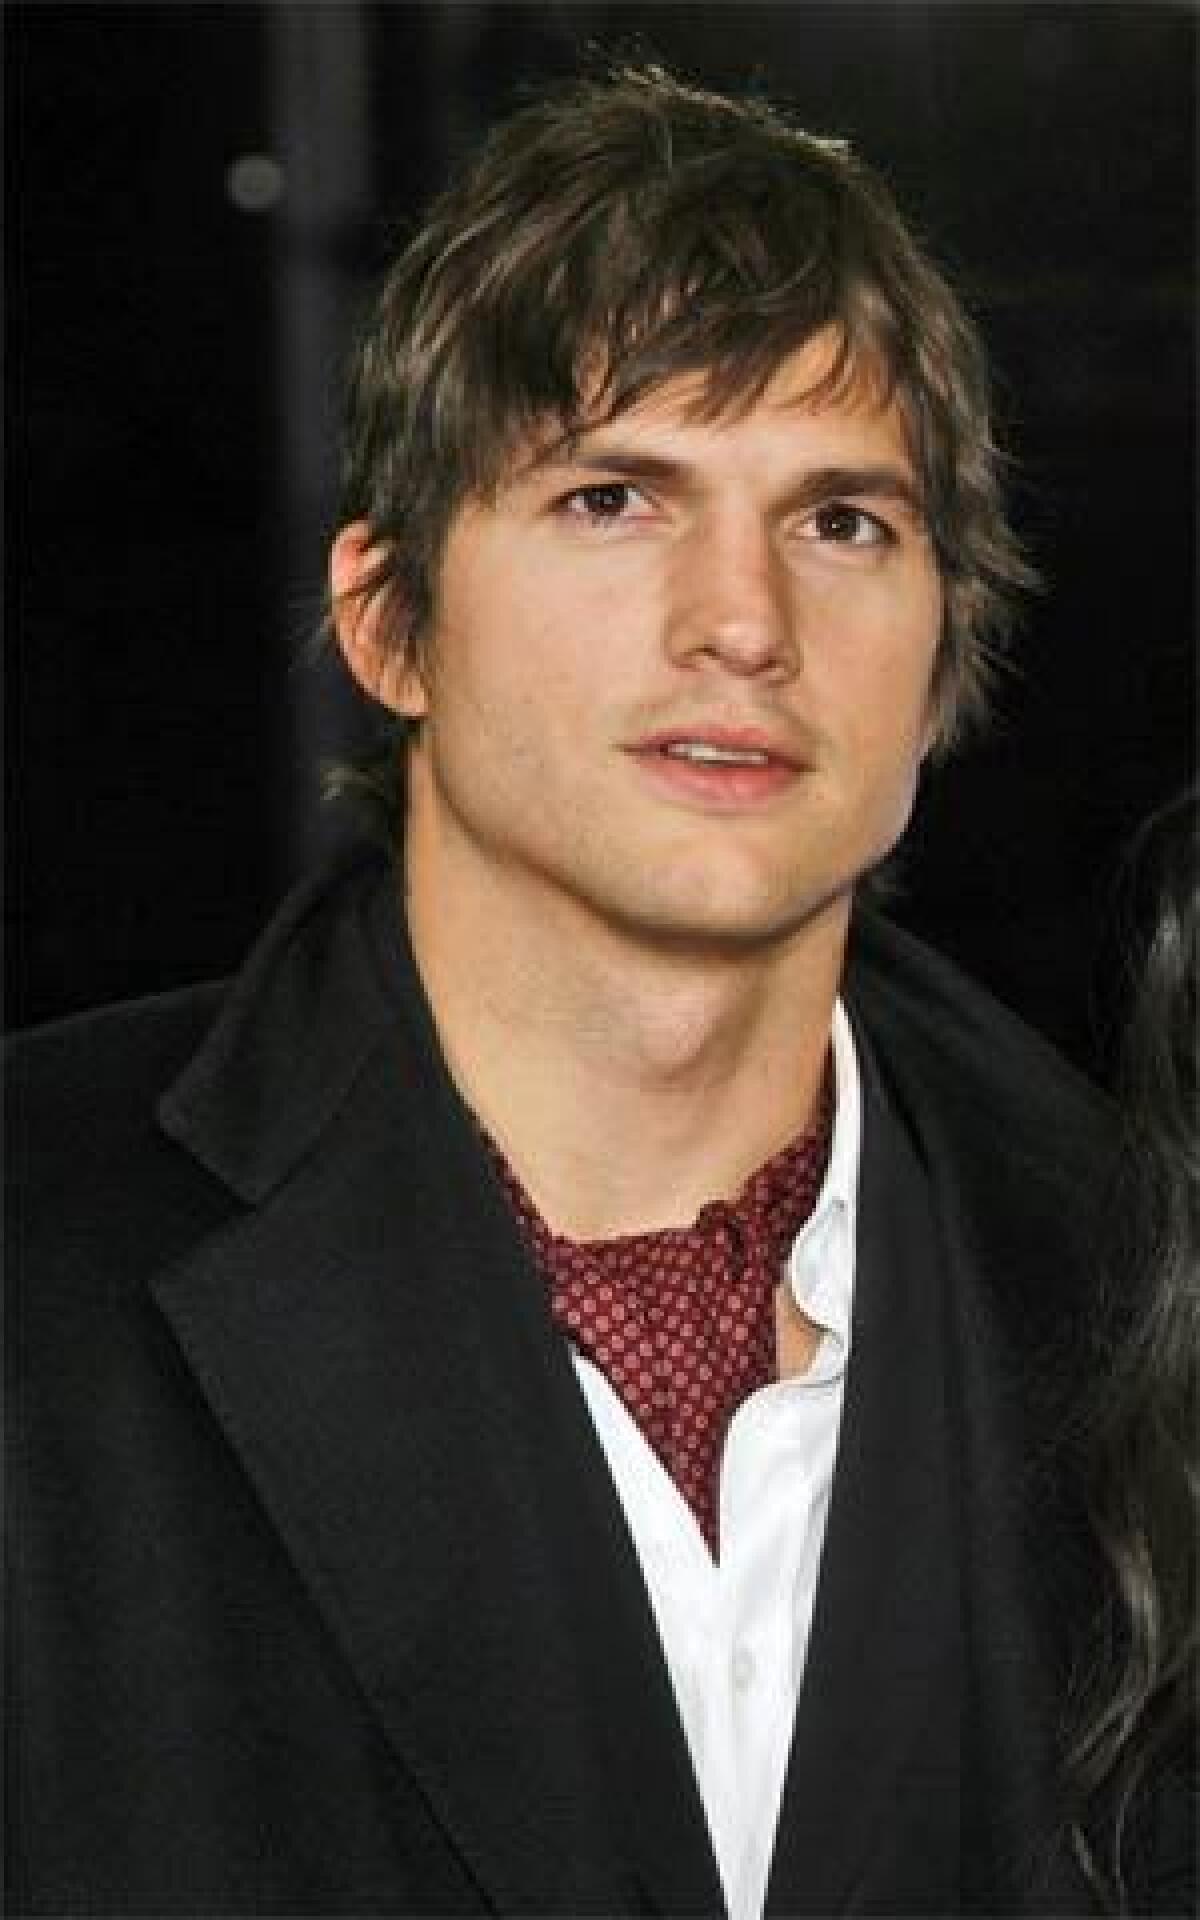 Ashton Kutcher arrives for the screening of "Happy Tears" at the 59th Berlin International Film Festival in Germany, Feb. 11, 2009.